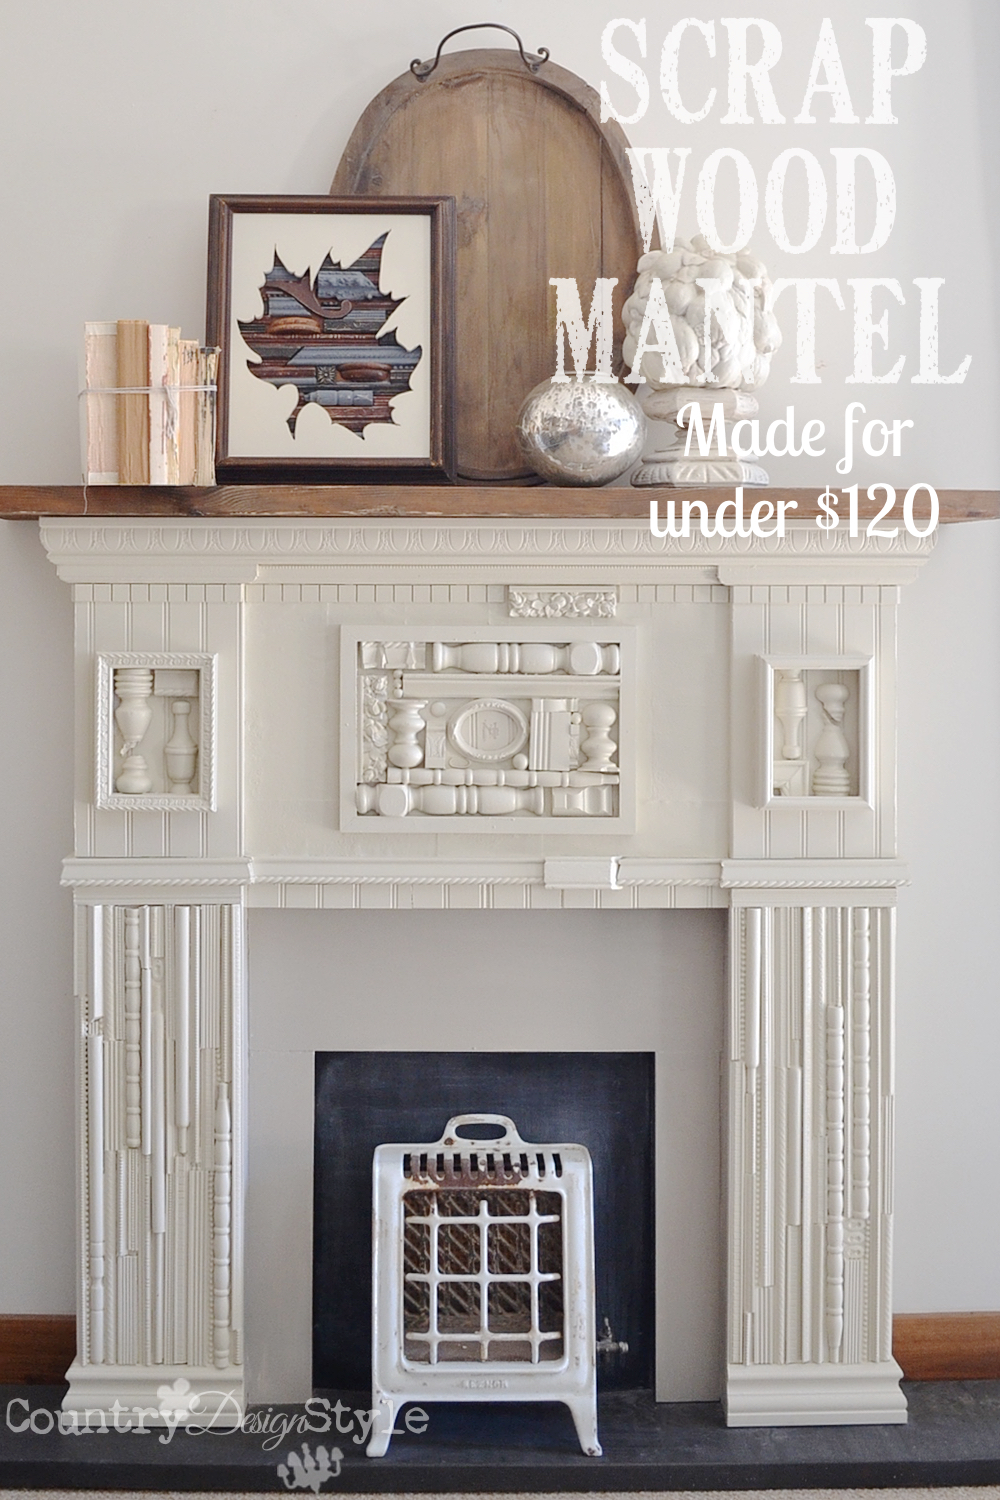 Learn how to make a DIY faux mantel. I make this one using scrap wood, broken spindles, thrift store frames and used chalkboard paint in the firebox area. Display in any room. Country Design Style